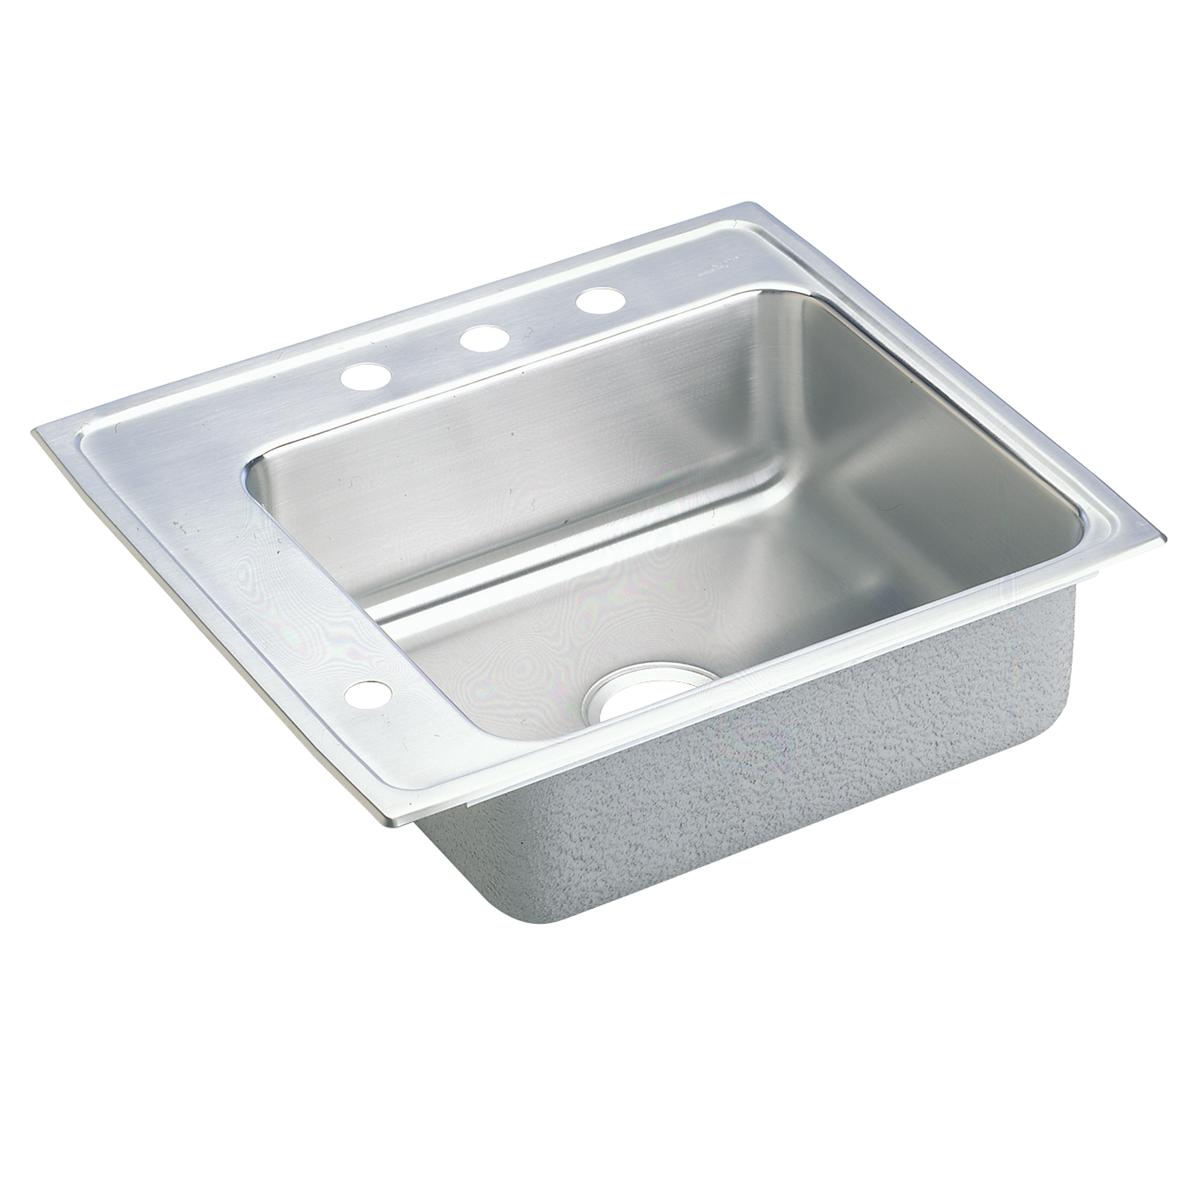 Elkay Lustertone Classic 22" x 19-1/2" x 4" 2LM-Hole Single Bowl Drop-in Classroom ADA Sink with Quick-clip